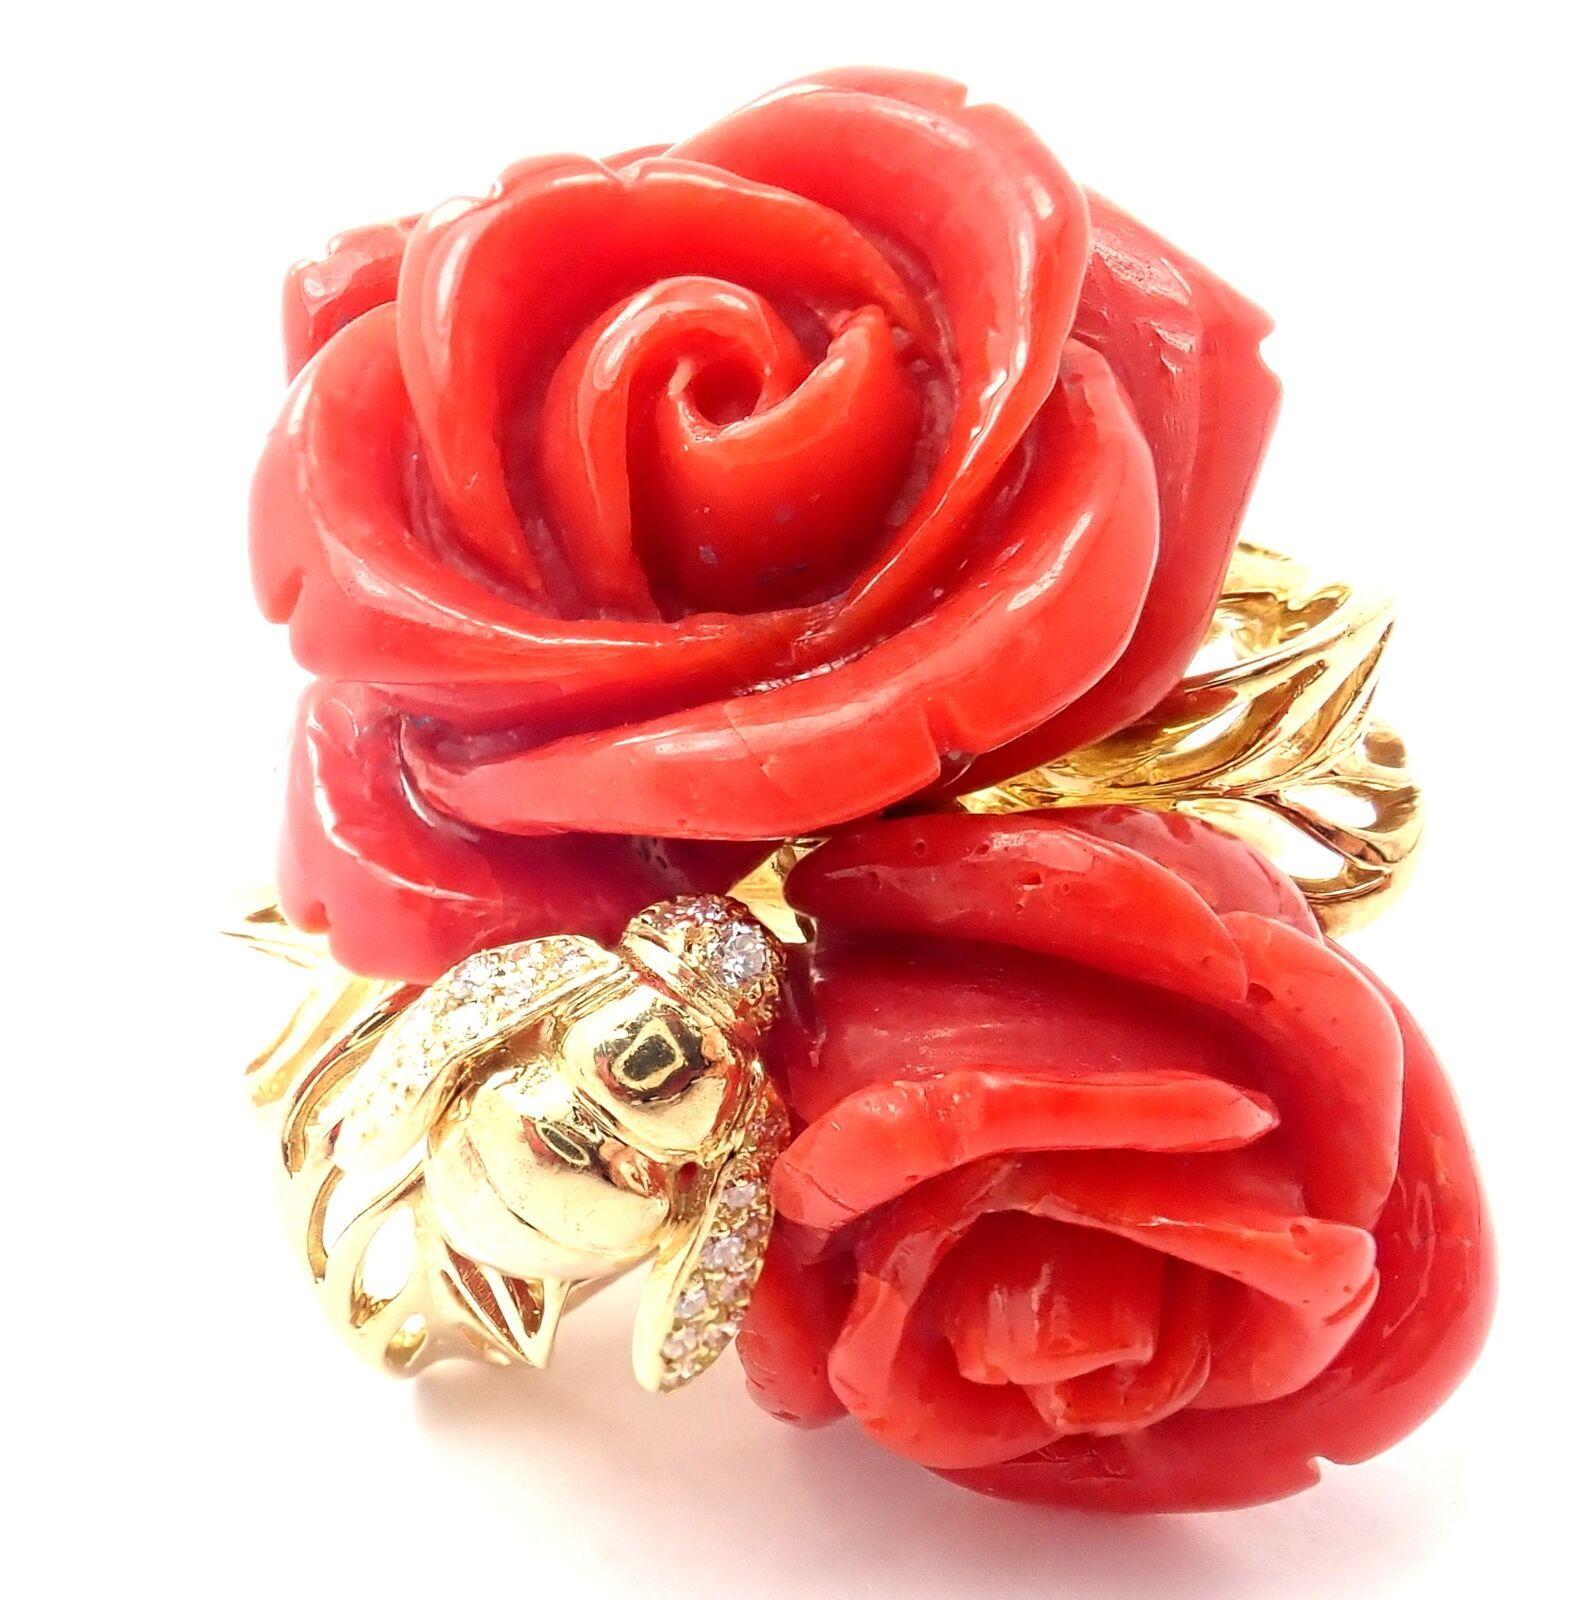 18k Yellow Gold Rose Pre Catelan Oxblood Coral, Diamond Bee Rose Ring by Christian Dior. 
This ring comes with an original Dior box. 
With Two Oxblood Coral Rose Flowers: 25x25mm and 20x20mm. 
Round brilliant cut diamonds, VVS1 clarity, F color